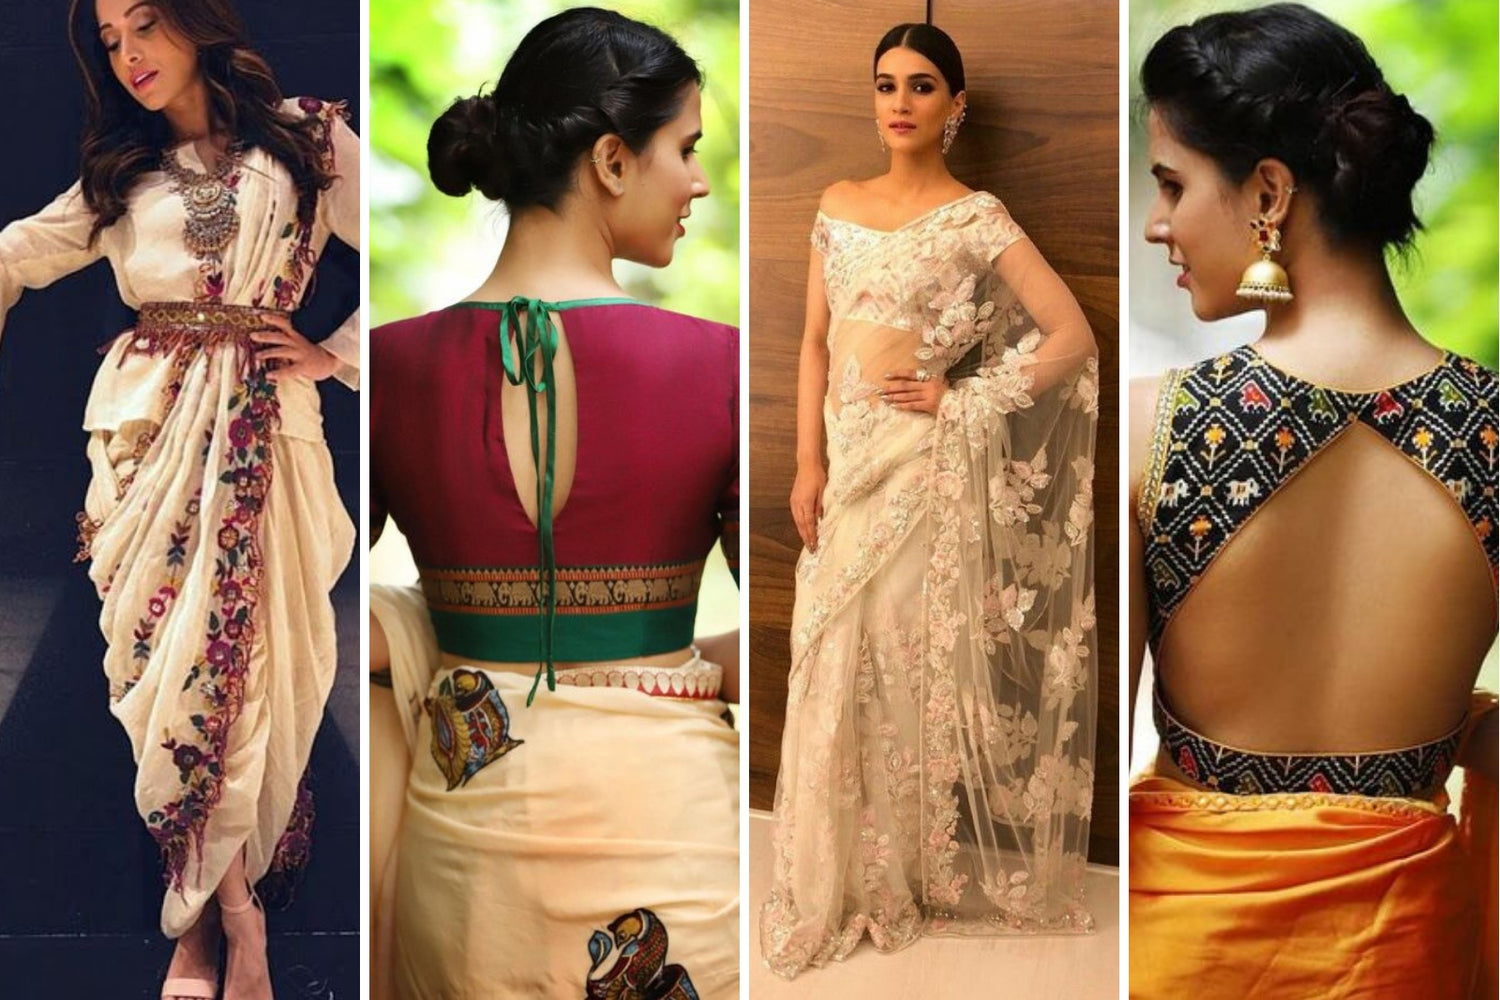 What's the best suited Saree for your body type?, by Saree.com